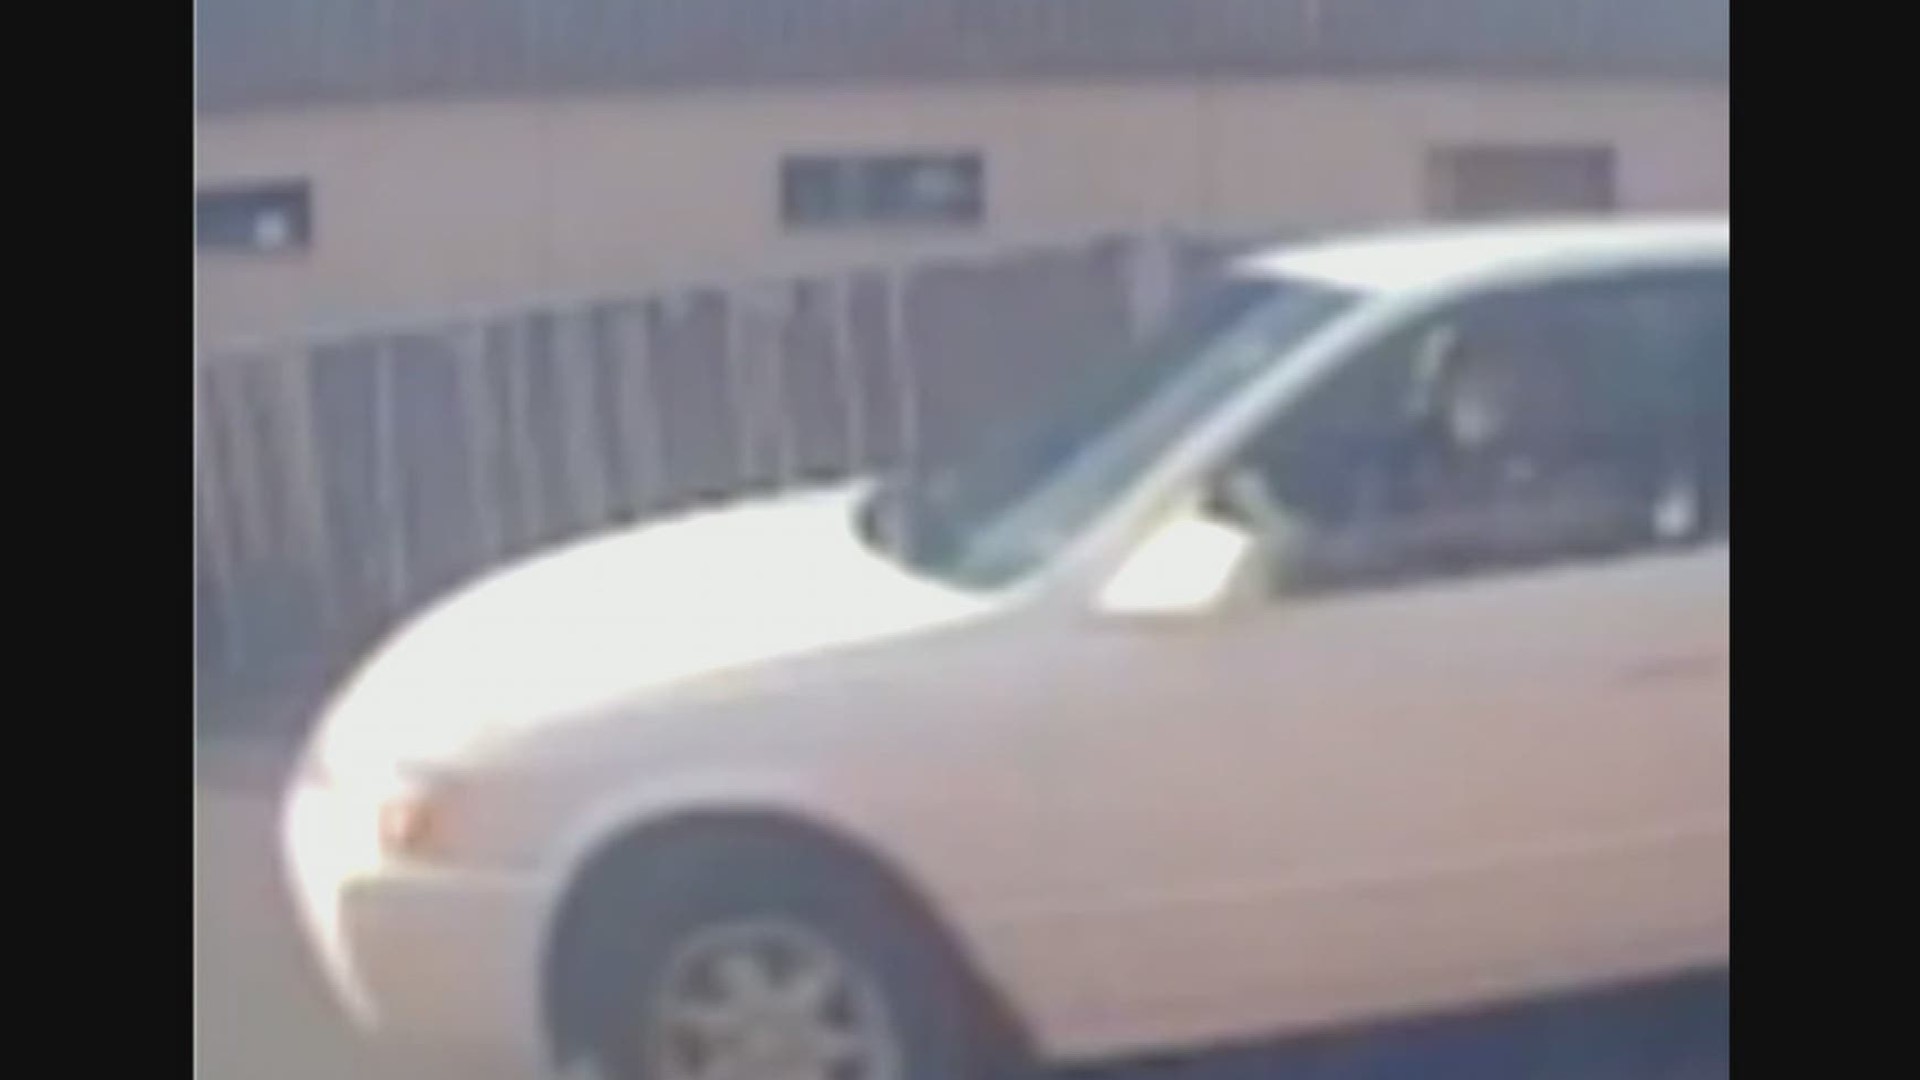 Police are looking for the car involved in a hit and run that left a 77-year-old woman dead.